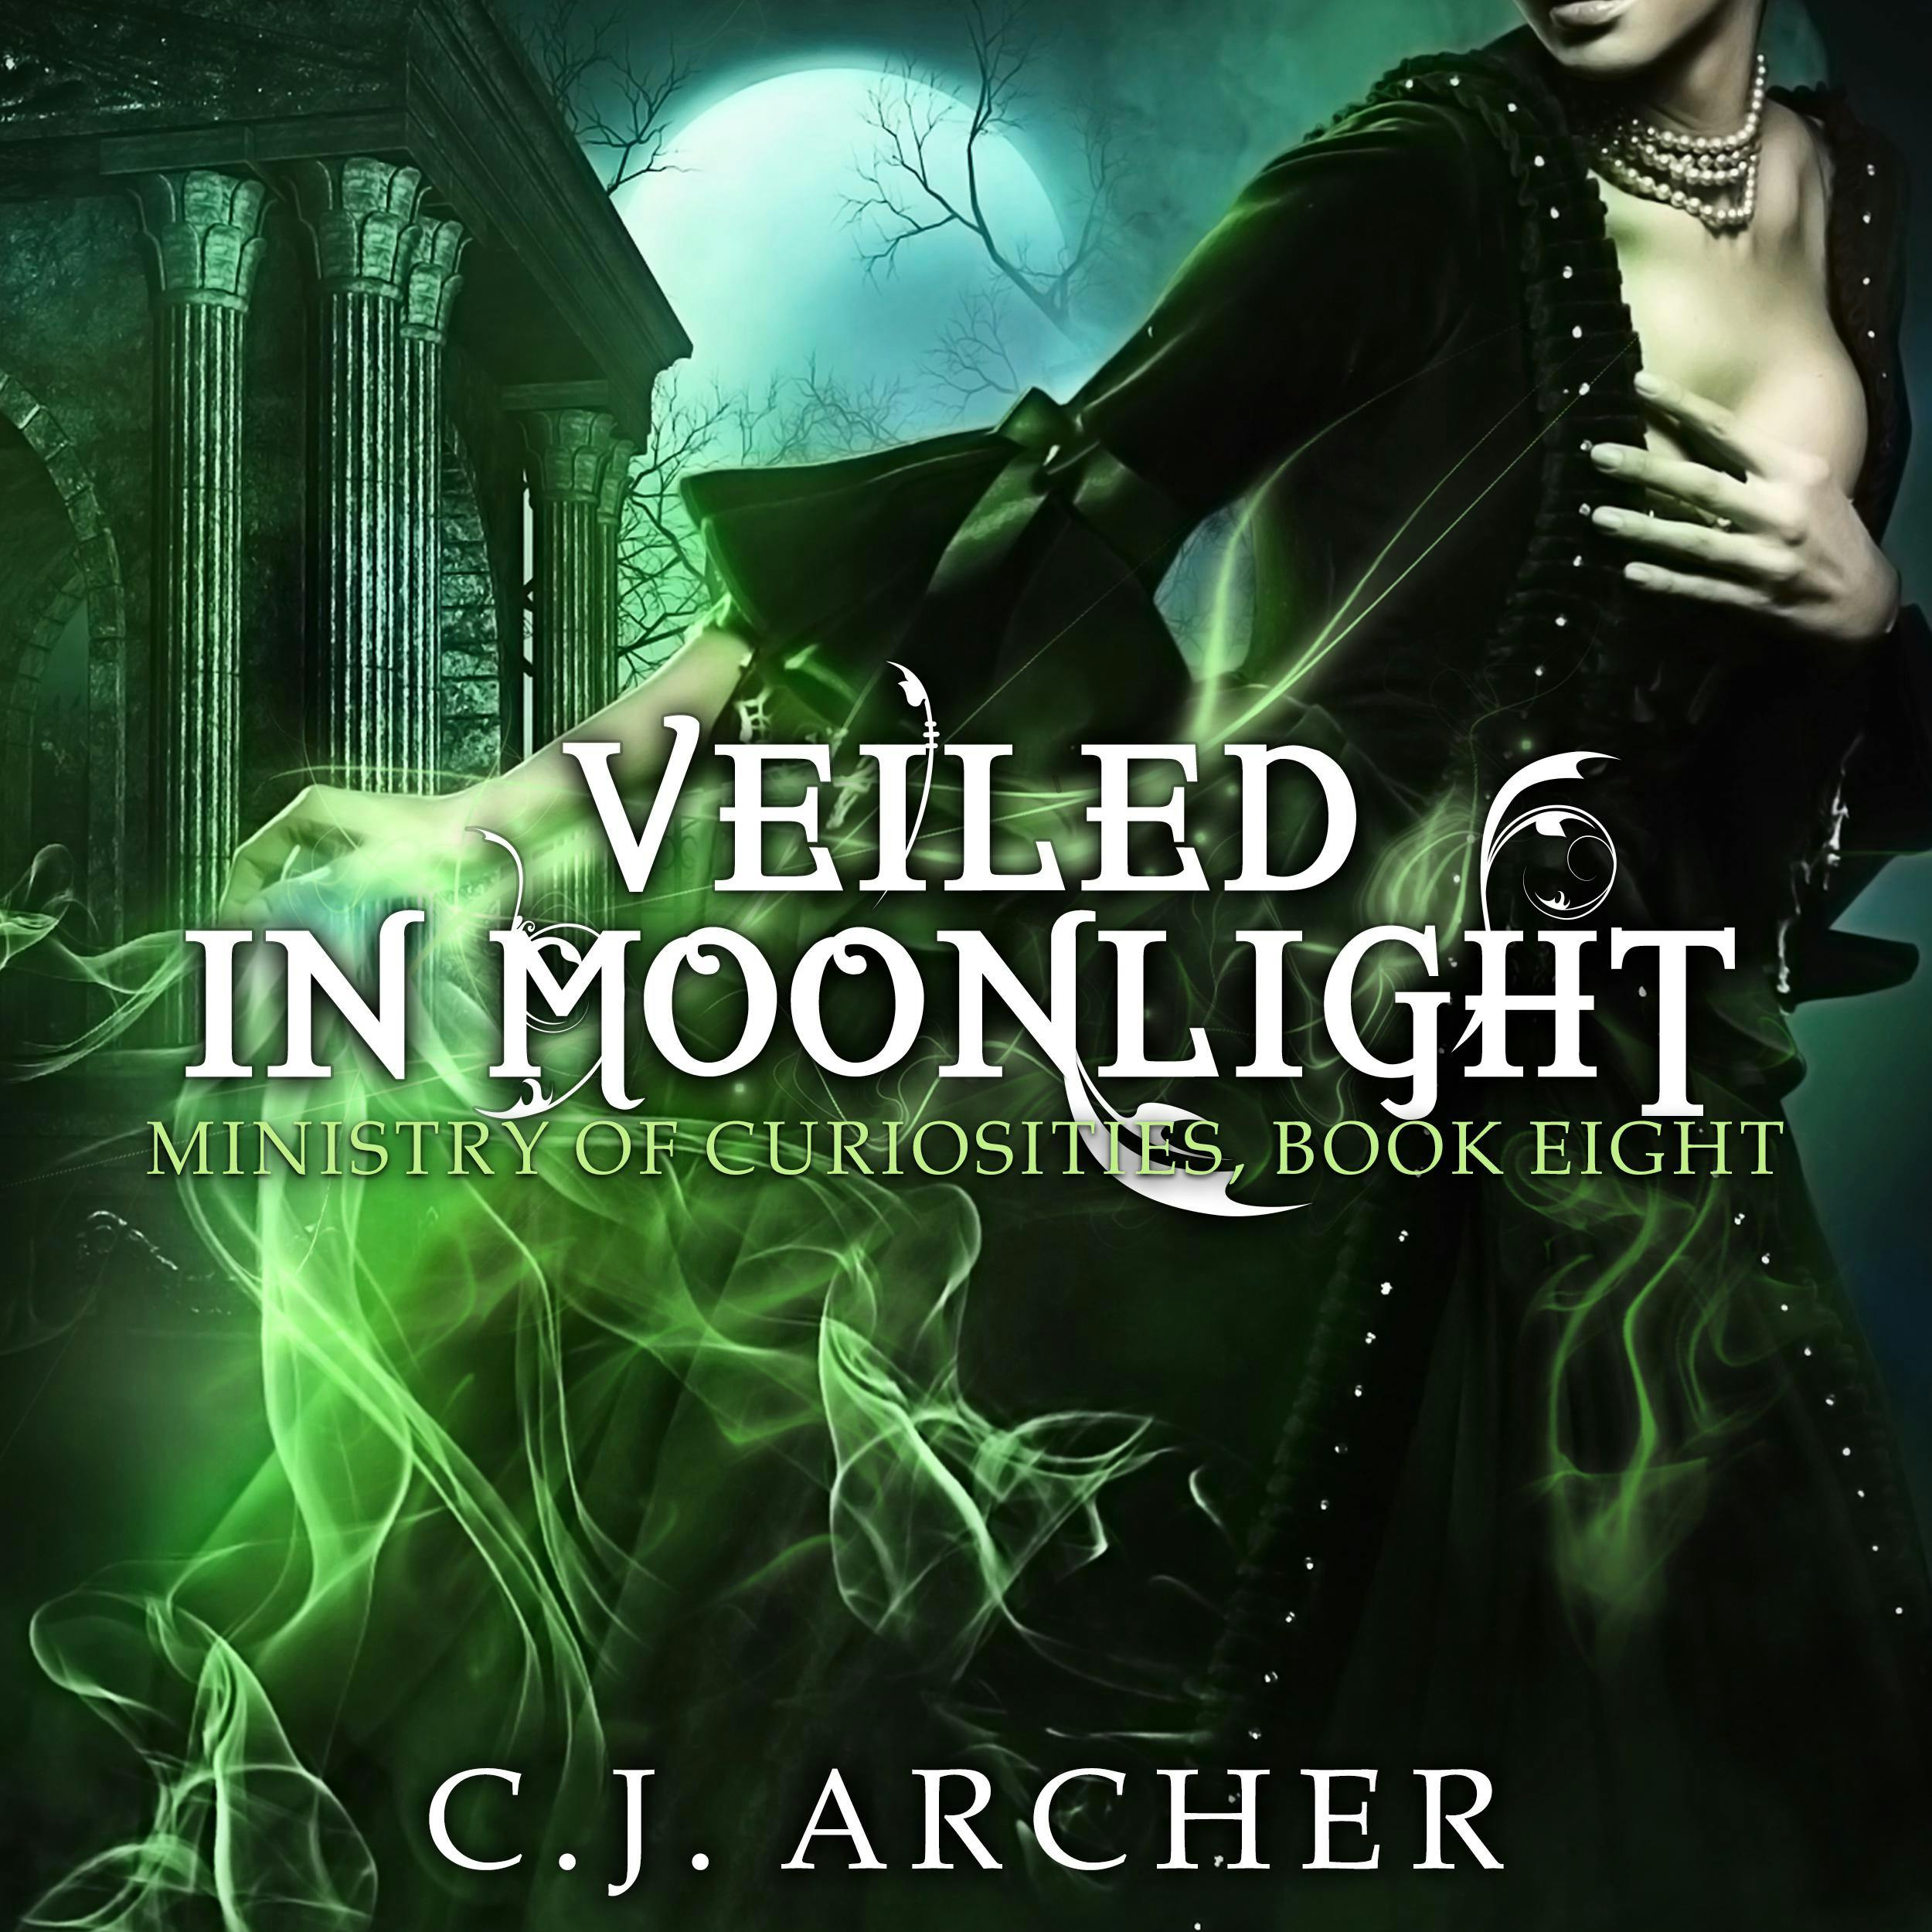 Veiled in Moonlight: The Ministry of Curiosities, book 8 - C.J. Archer